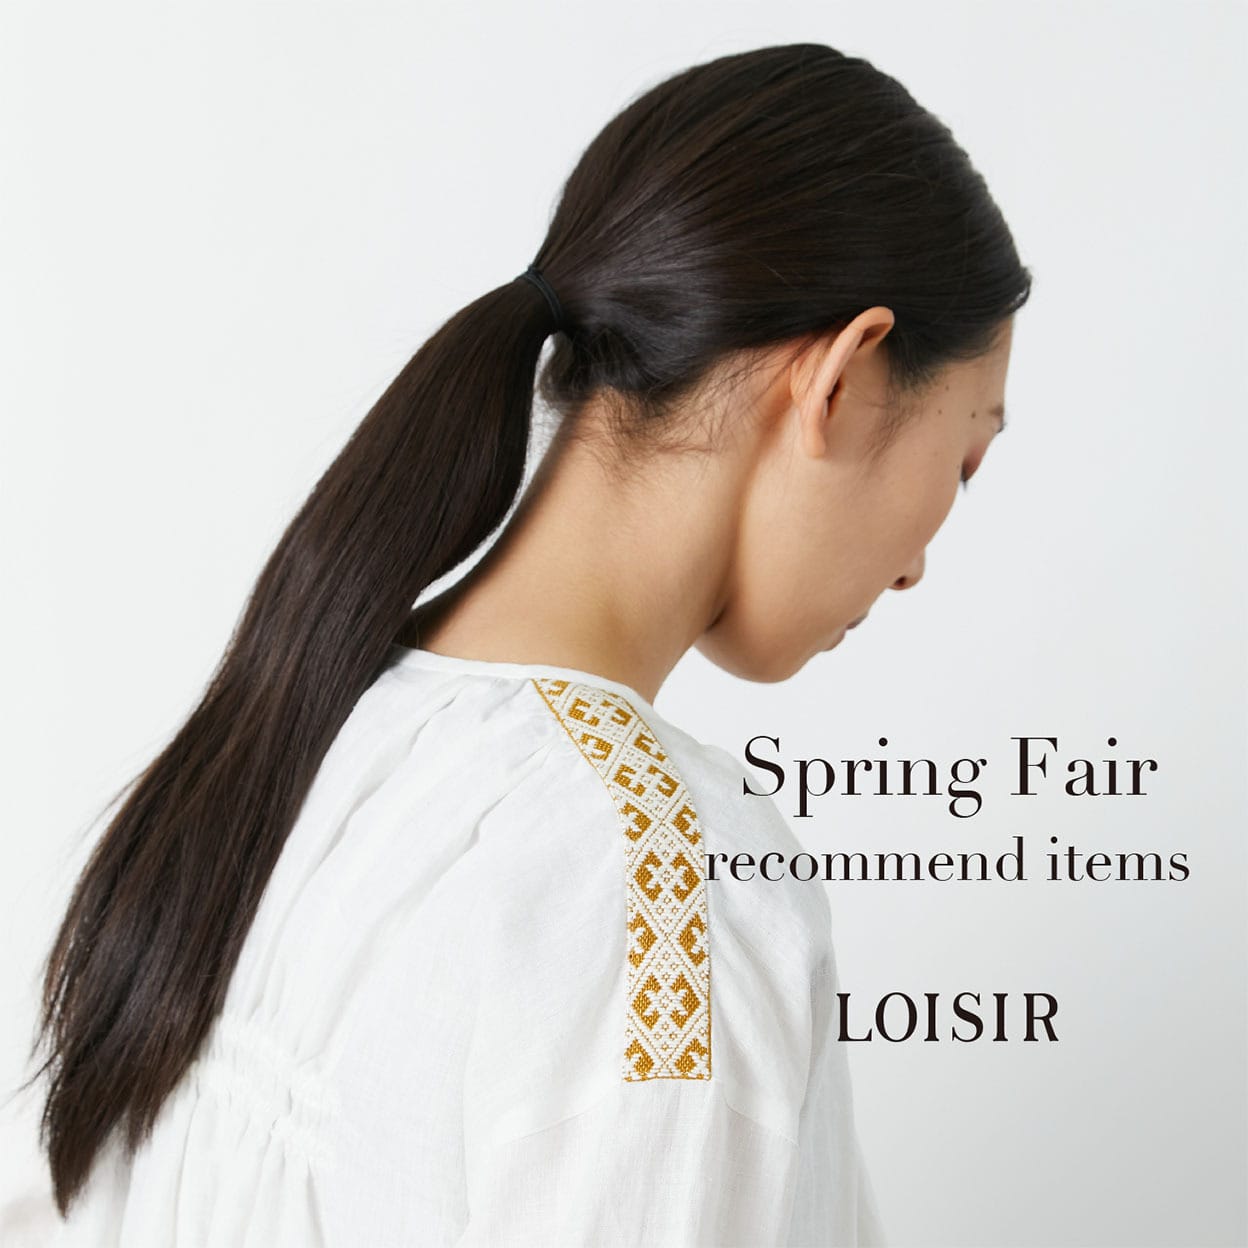 Spring Fair recommend items